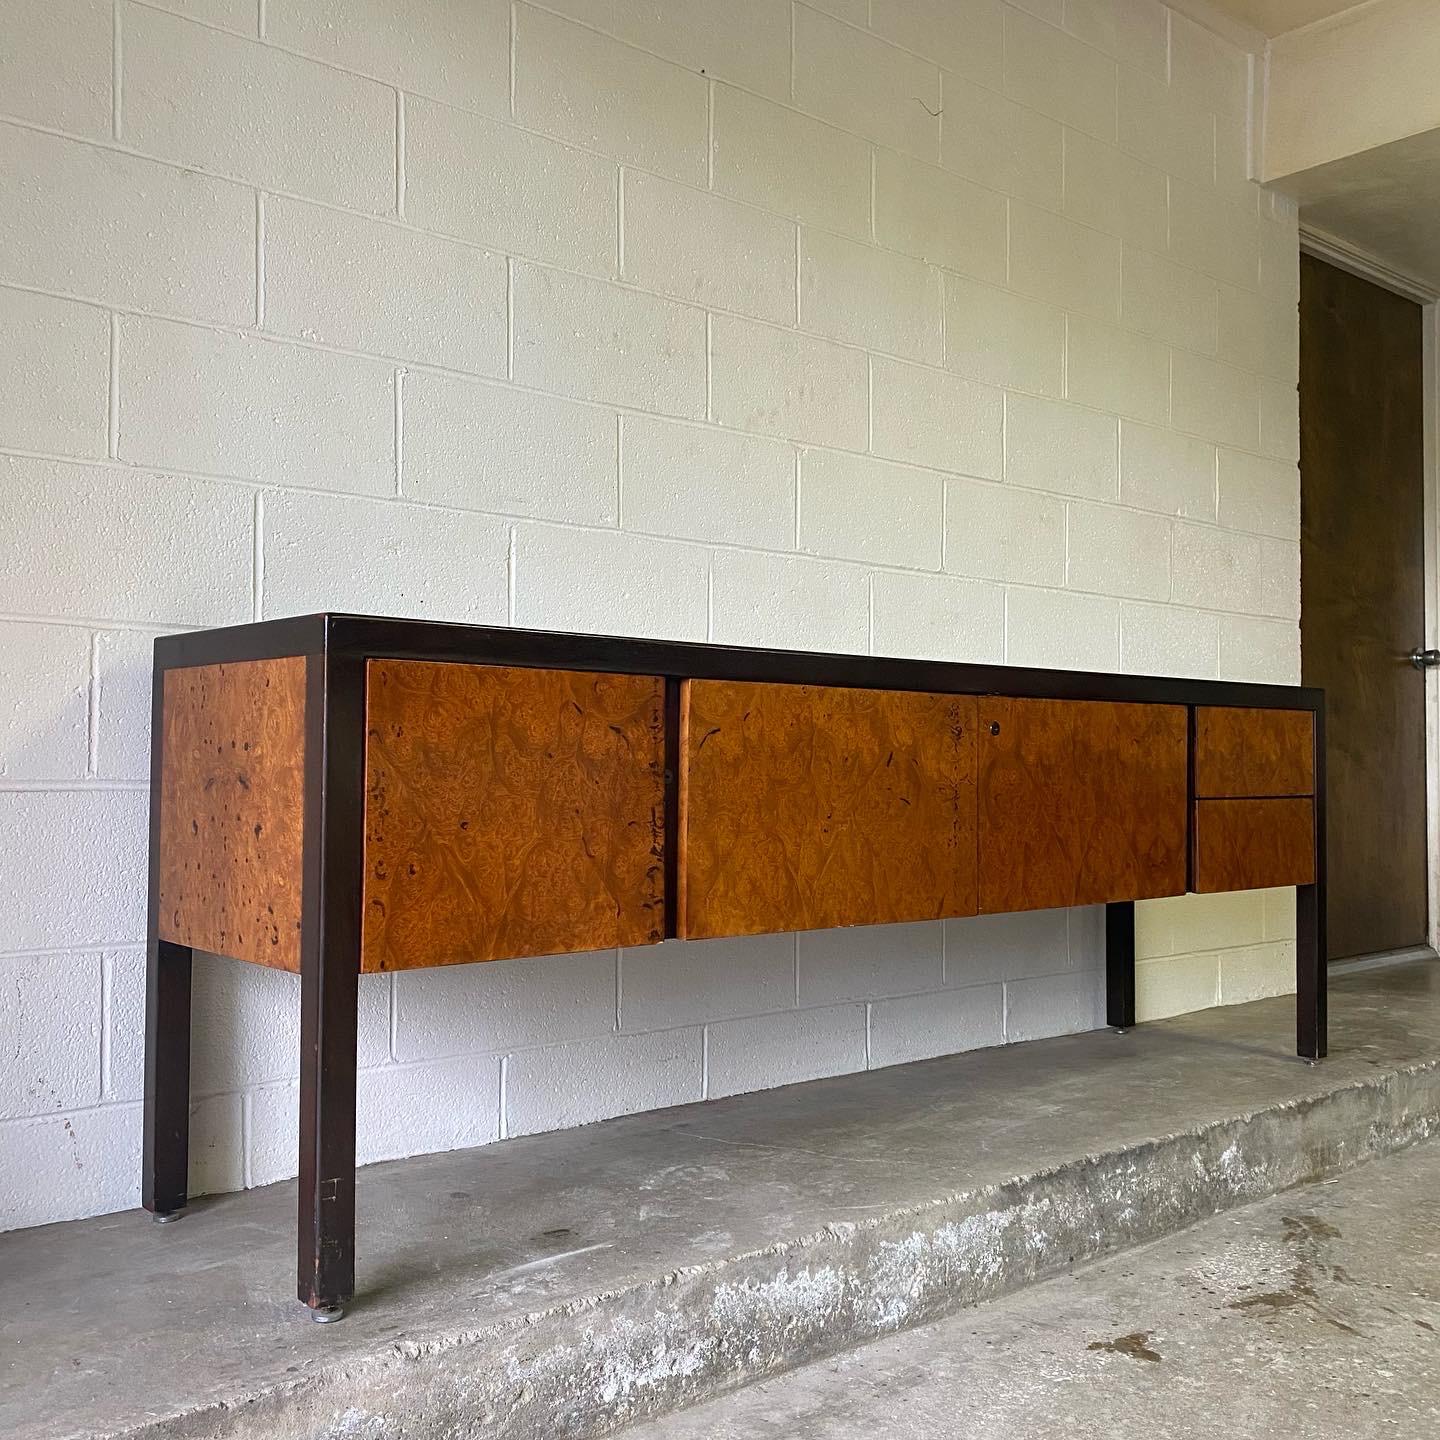 This is an incredibly high quality olive burl credenza with leather top and mahogany frame and legs, ca. 1970’s. The extent gone to make this piece luxurious shows how high end it is. It’s stunning all the way around with burl on both sides. There’s